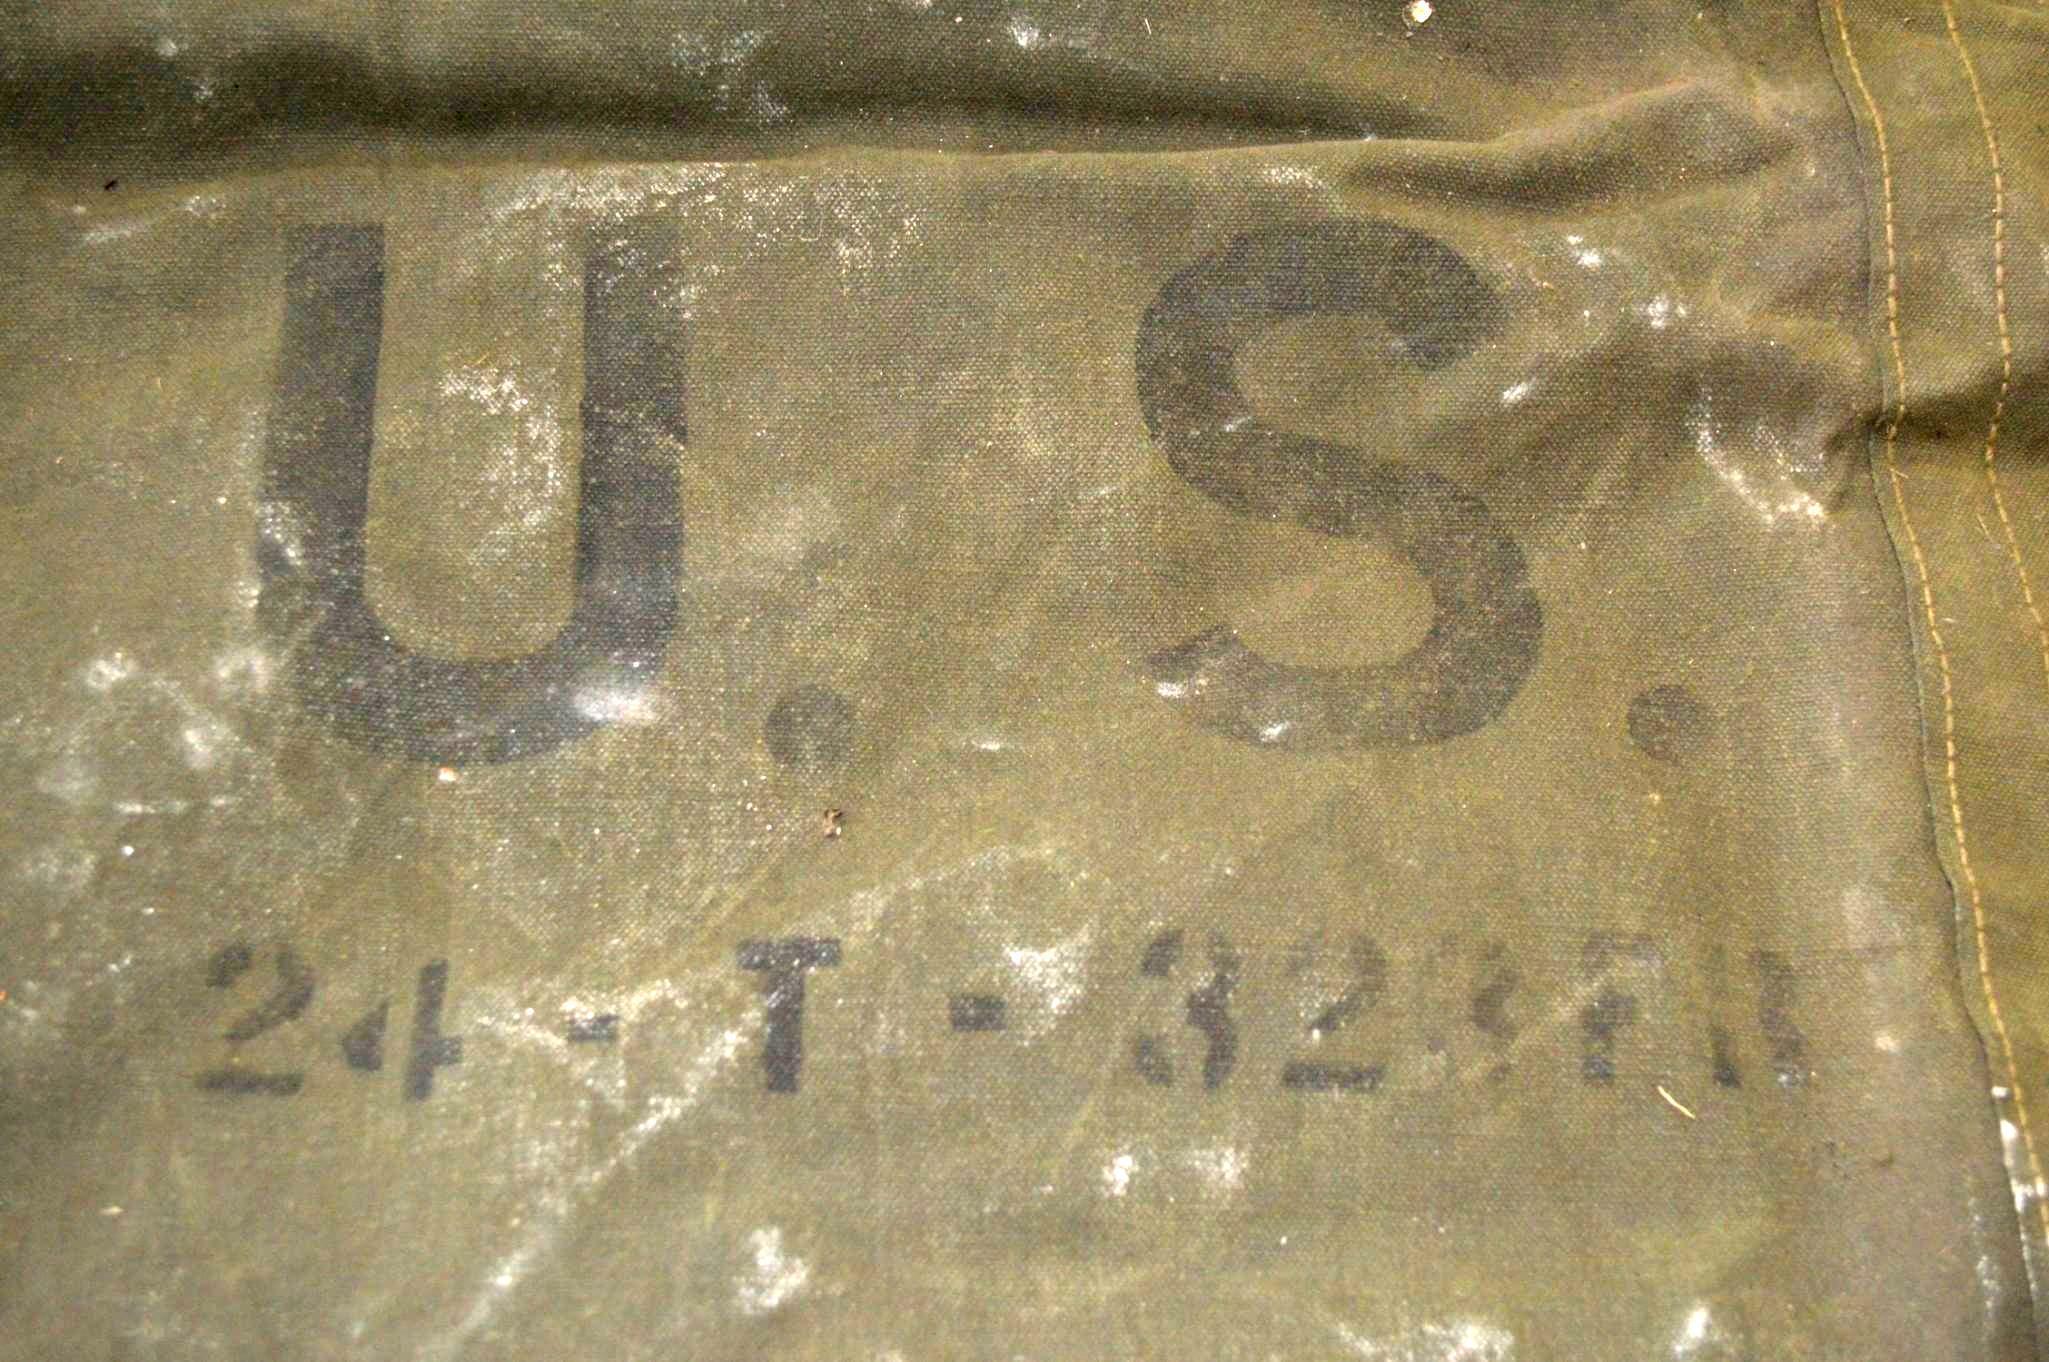 Army Issued Surplus From WWII - US Army Tent 24-T 309, Cot, Wool Blankets, Pup Tent Set